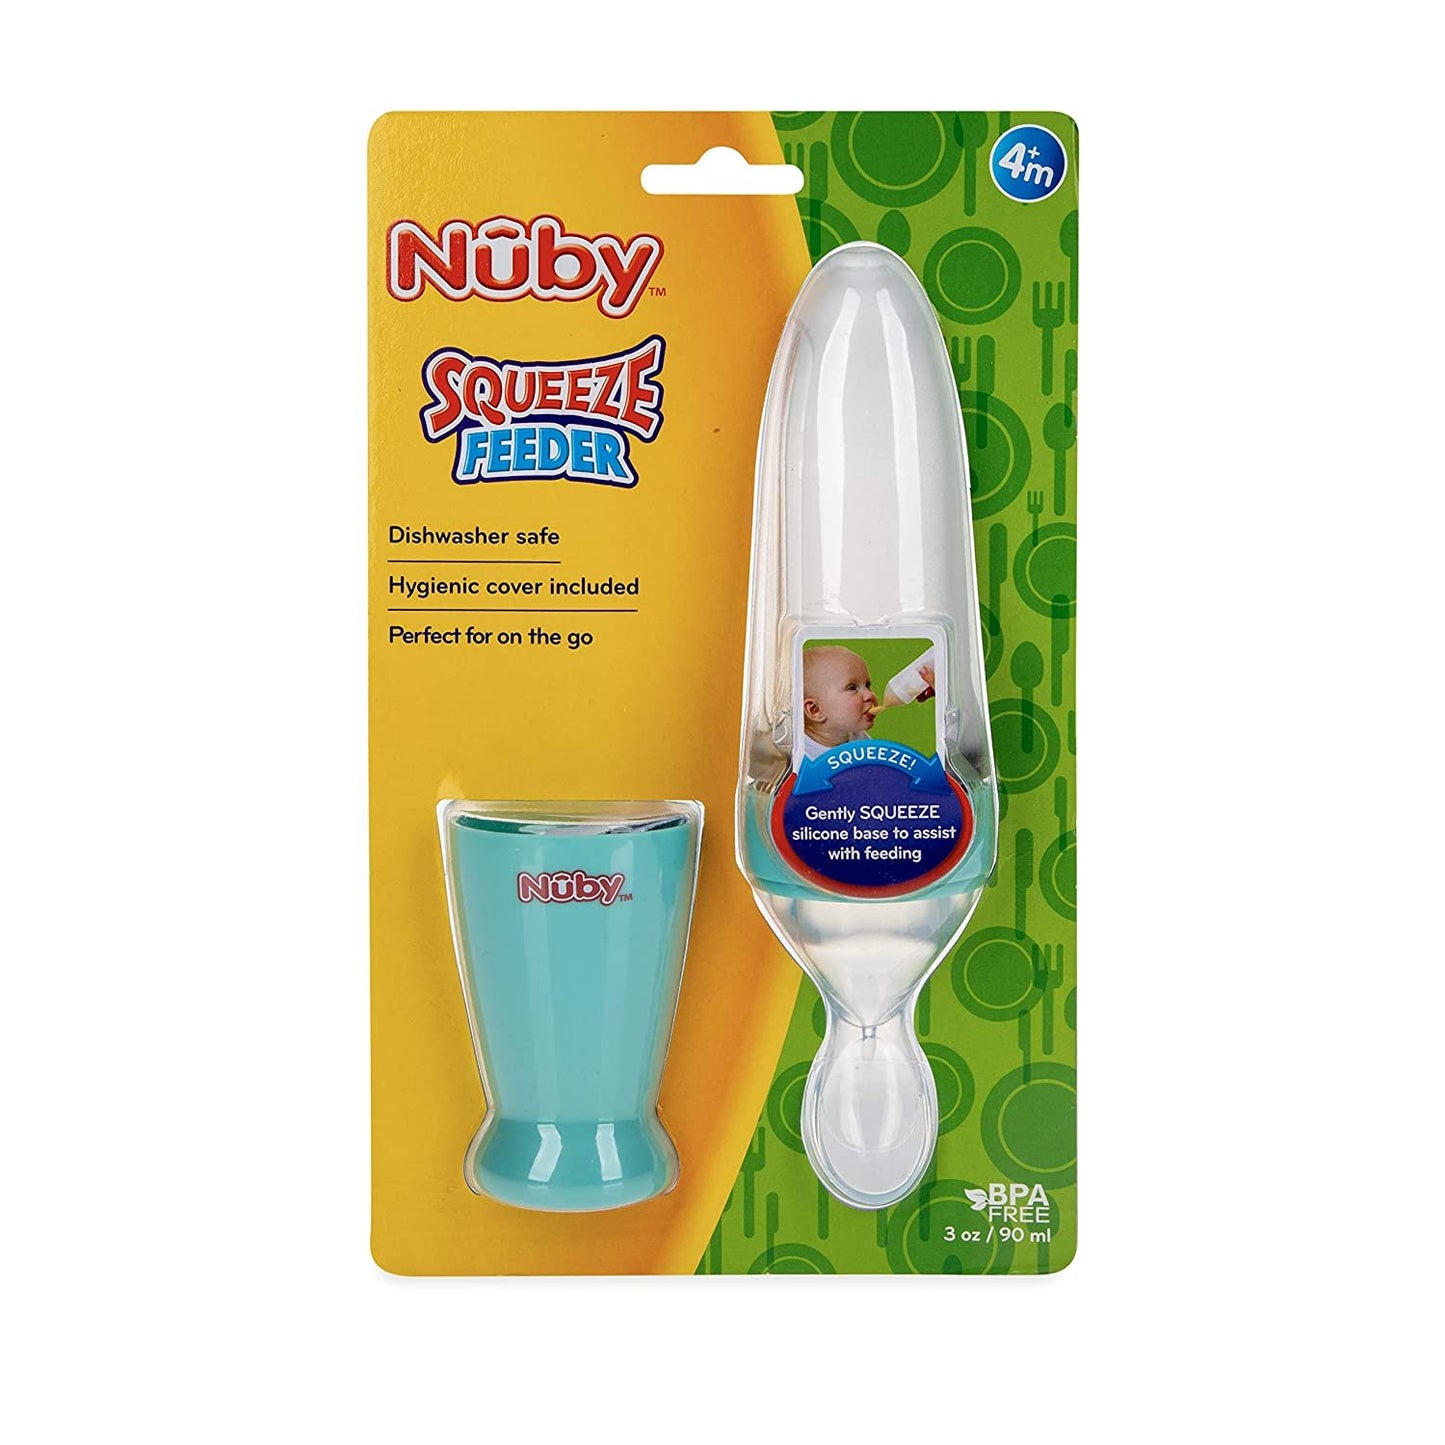 Nuby New & Improved Silicone Food Dispensing Squeeze Feeder with Cover & Stand, 4+ Months/ 3 Oz/ 90 Ml, Colors Vary: Blue, Pink, Green